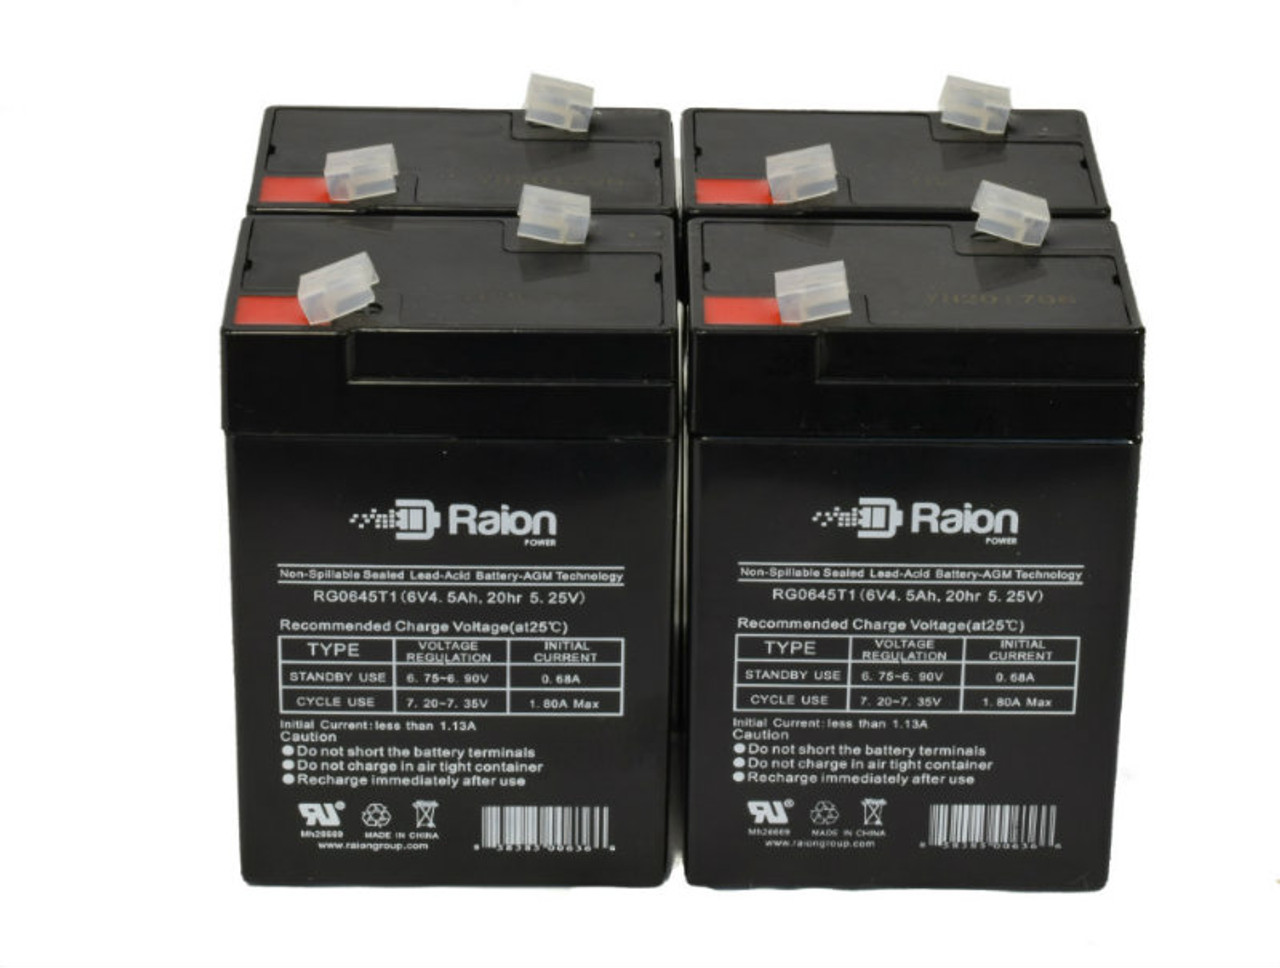 Raion Power 6V 4.5Ah Replacement Emergency Light Battery for Big Beam 2CL6S5 - 4 Pack